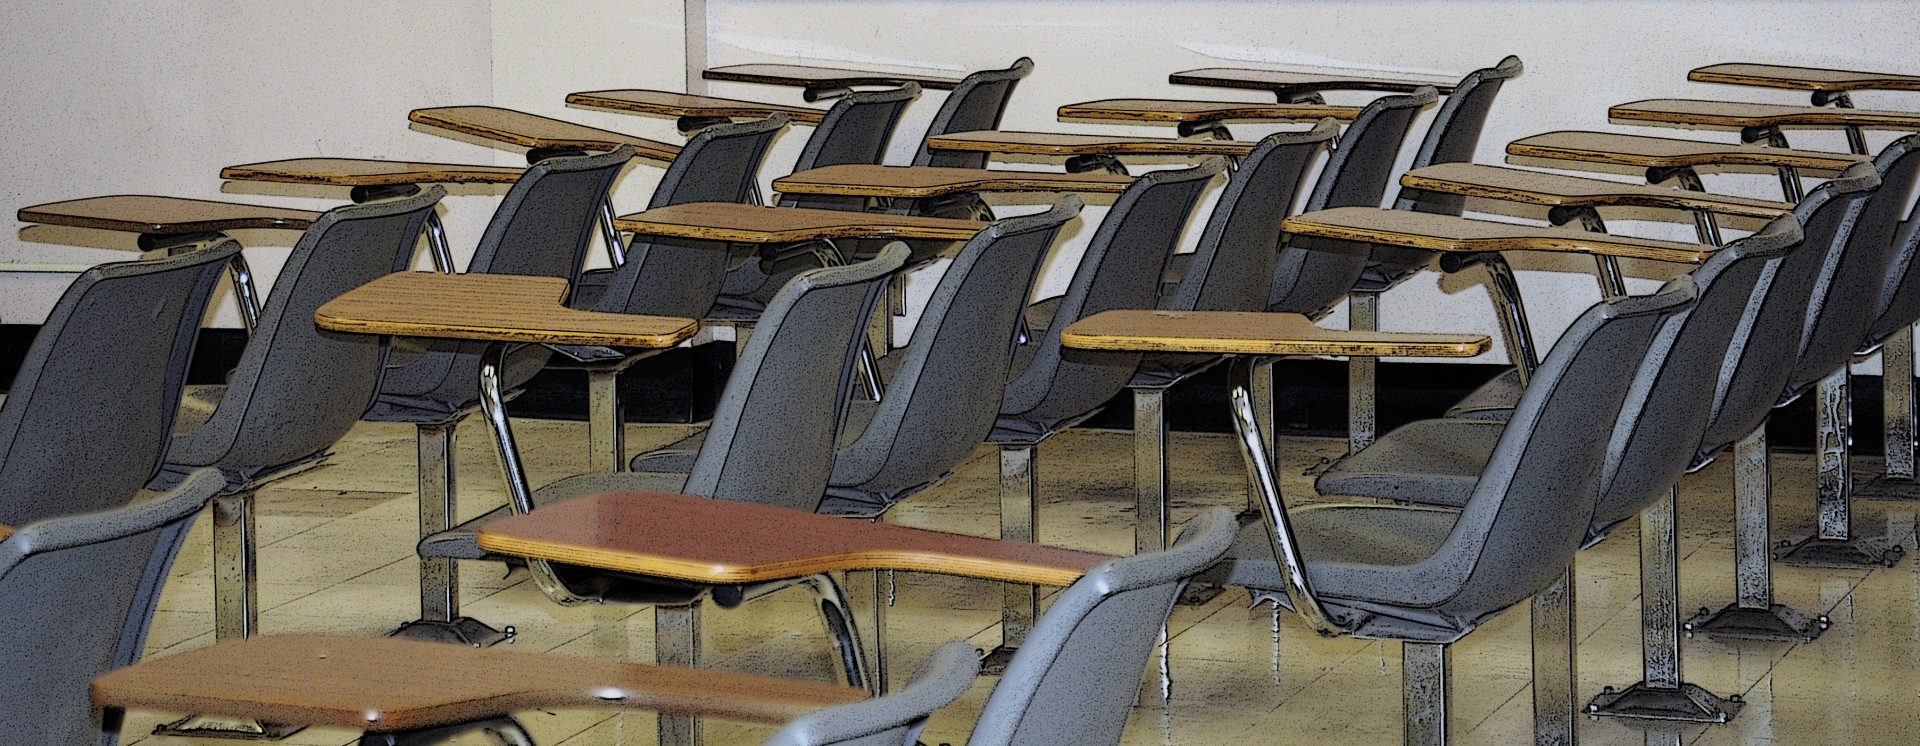 rows of chairs and desk in a classroom